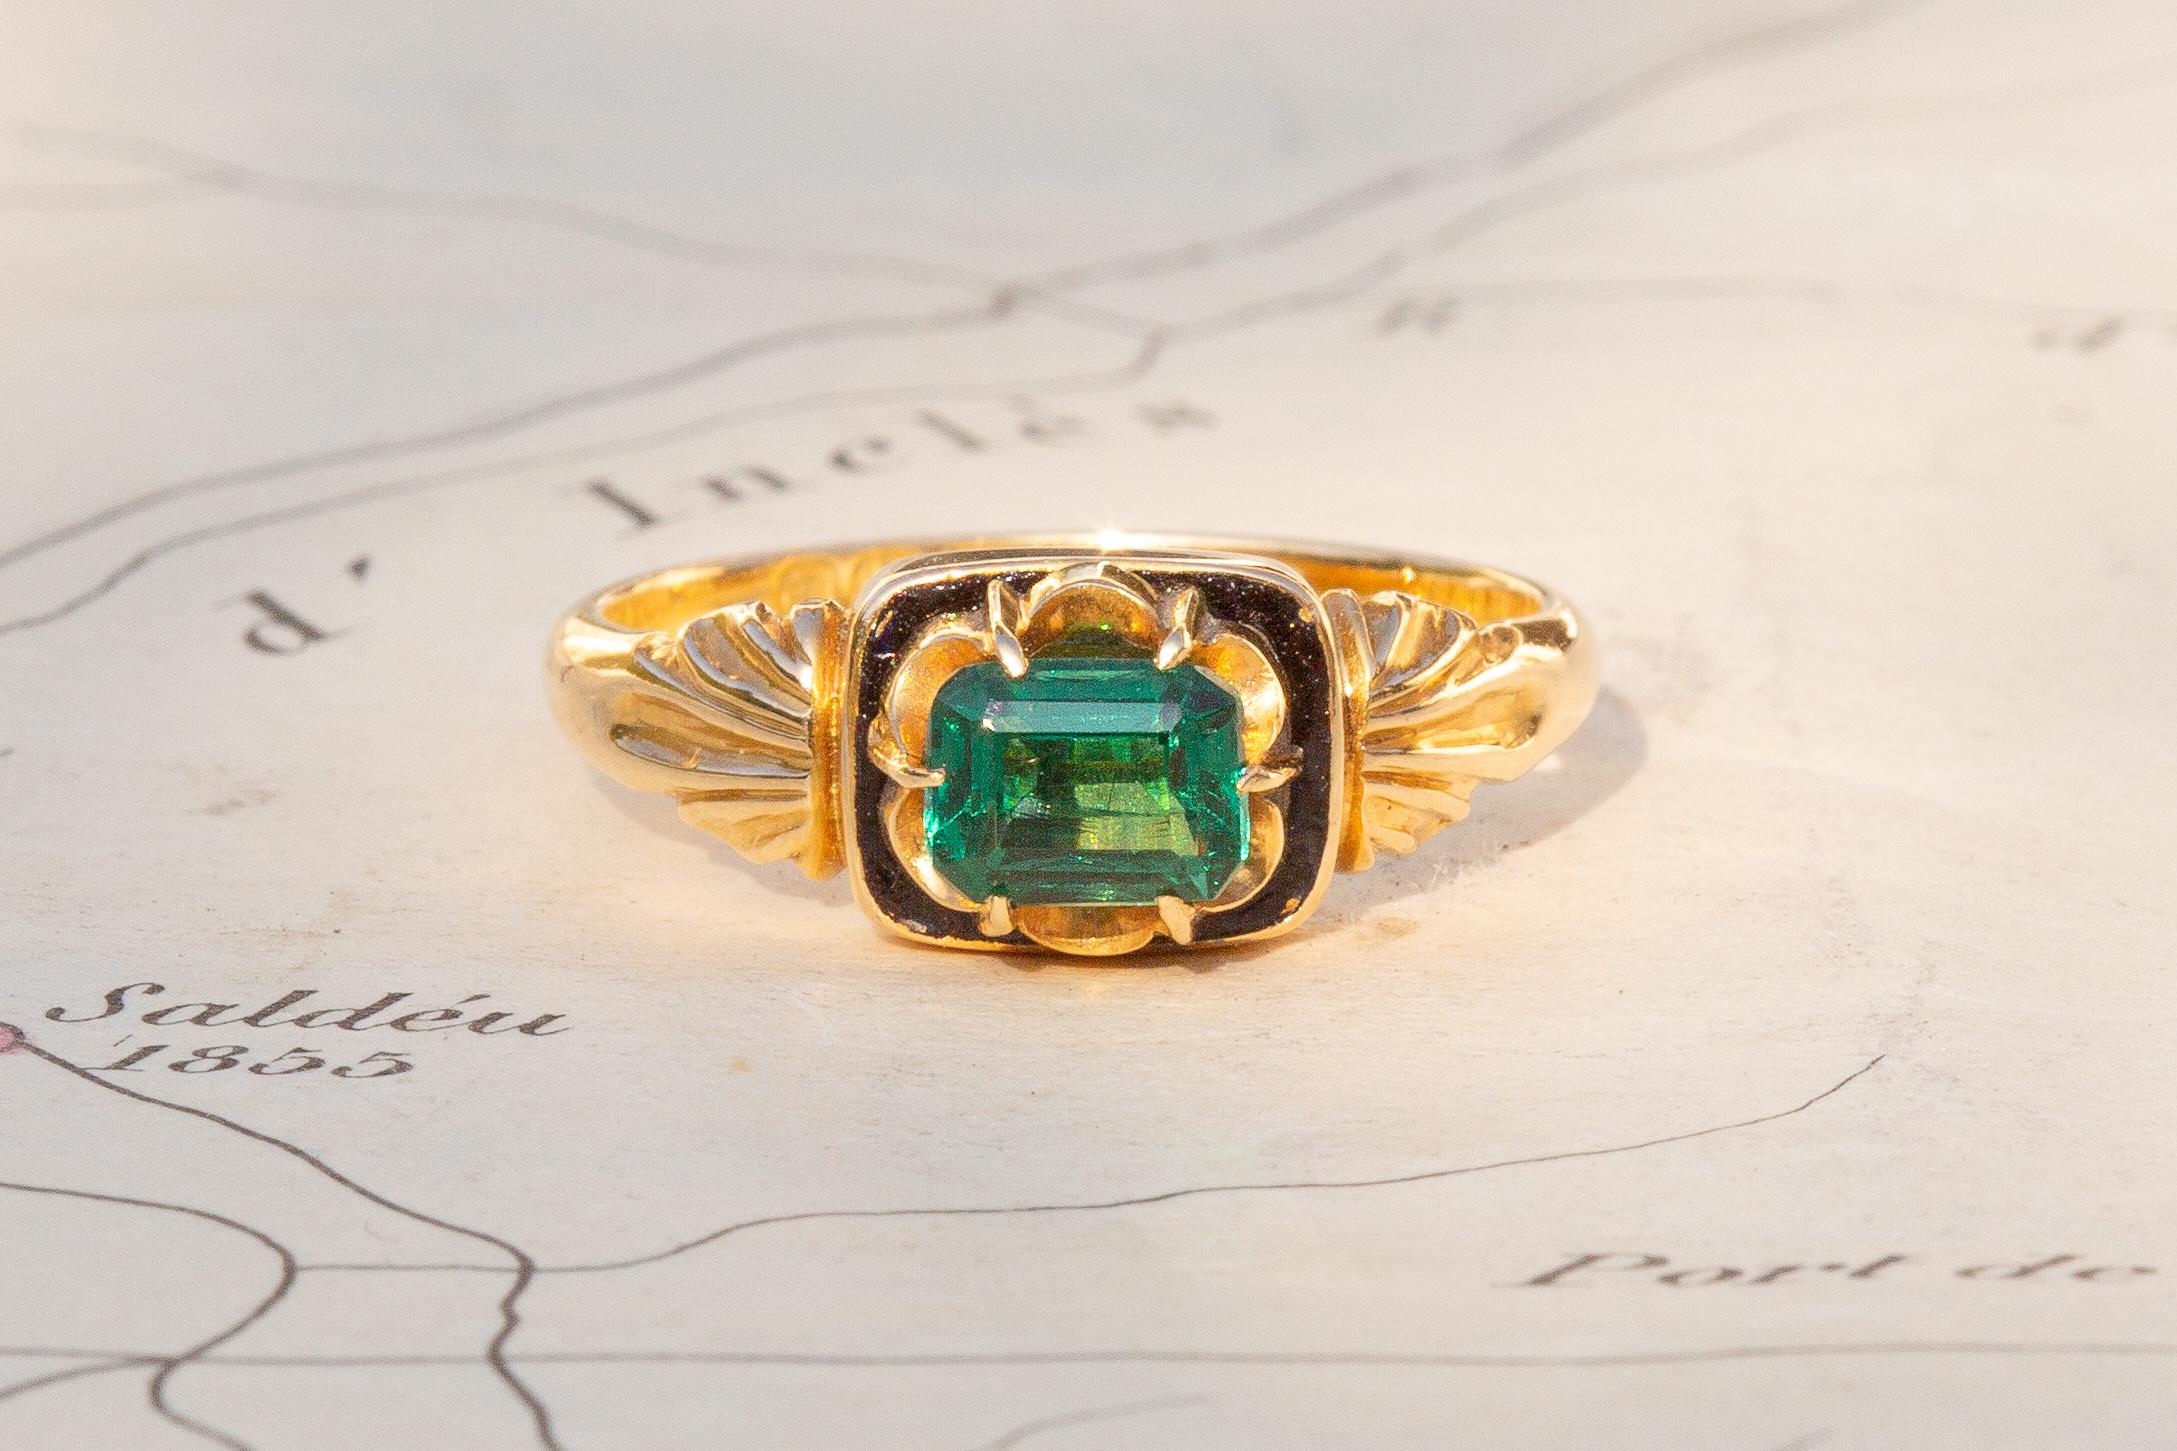 This striking antique single-stone ring was made in London and dates to 1890. It is crafted in 18K gold and set with an octagonal step cut green paste in a pronged setting. The stone is a wonderful vivid green colour and sits majestically in the